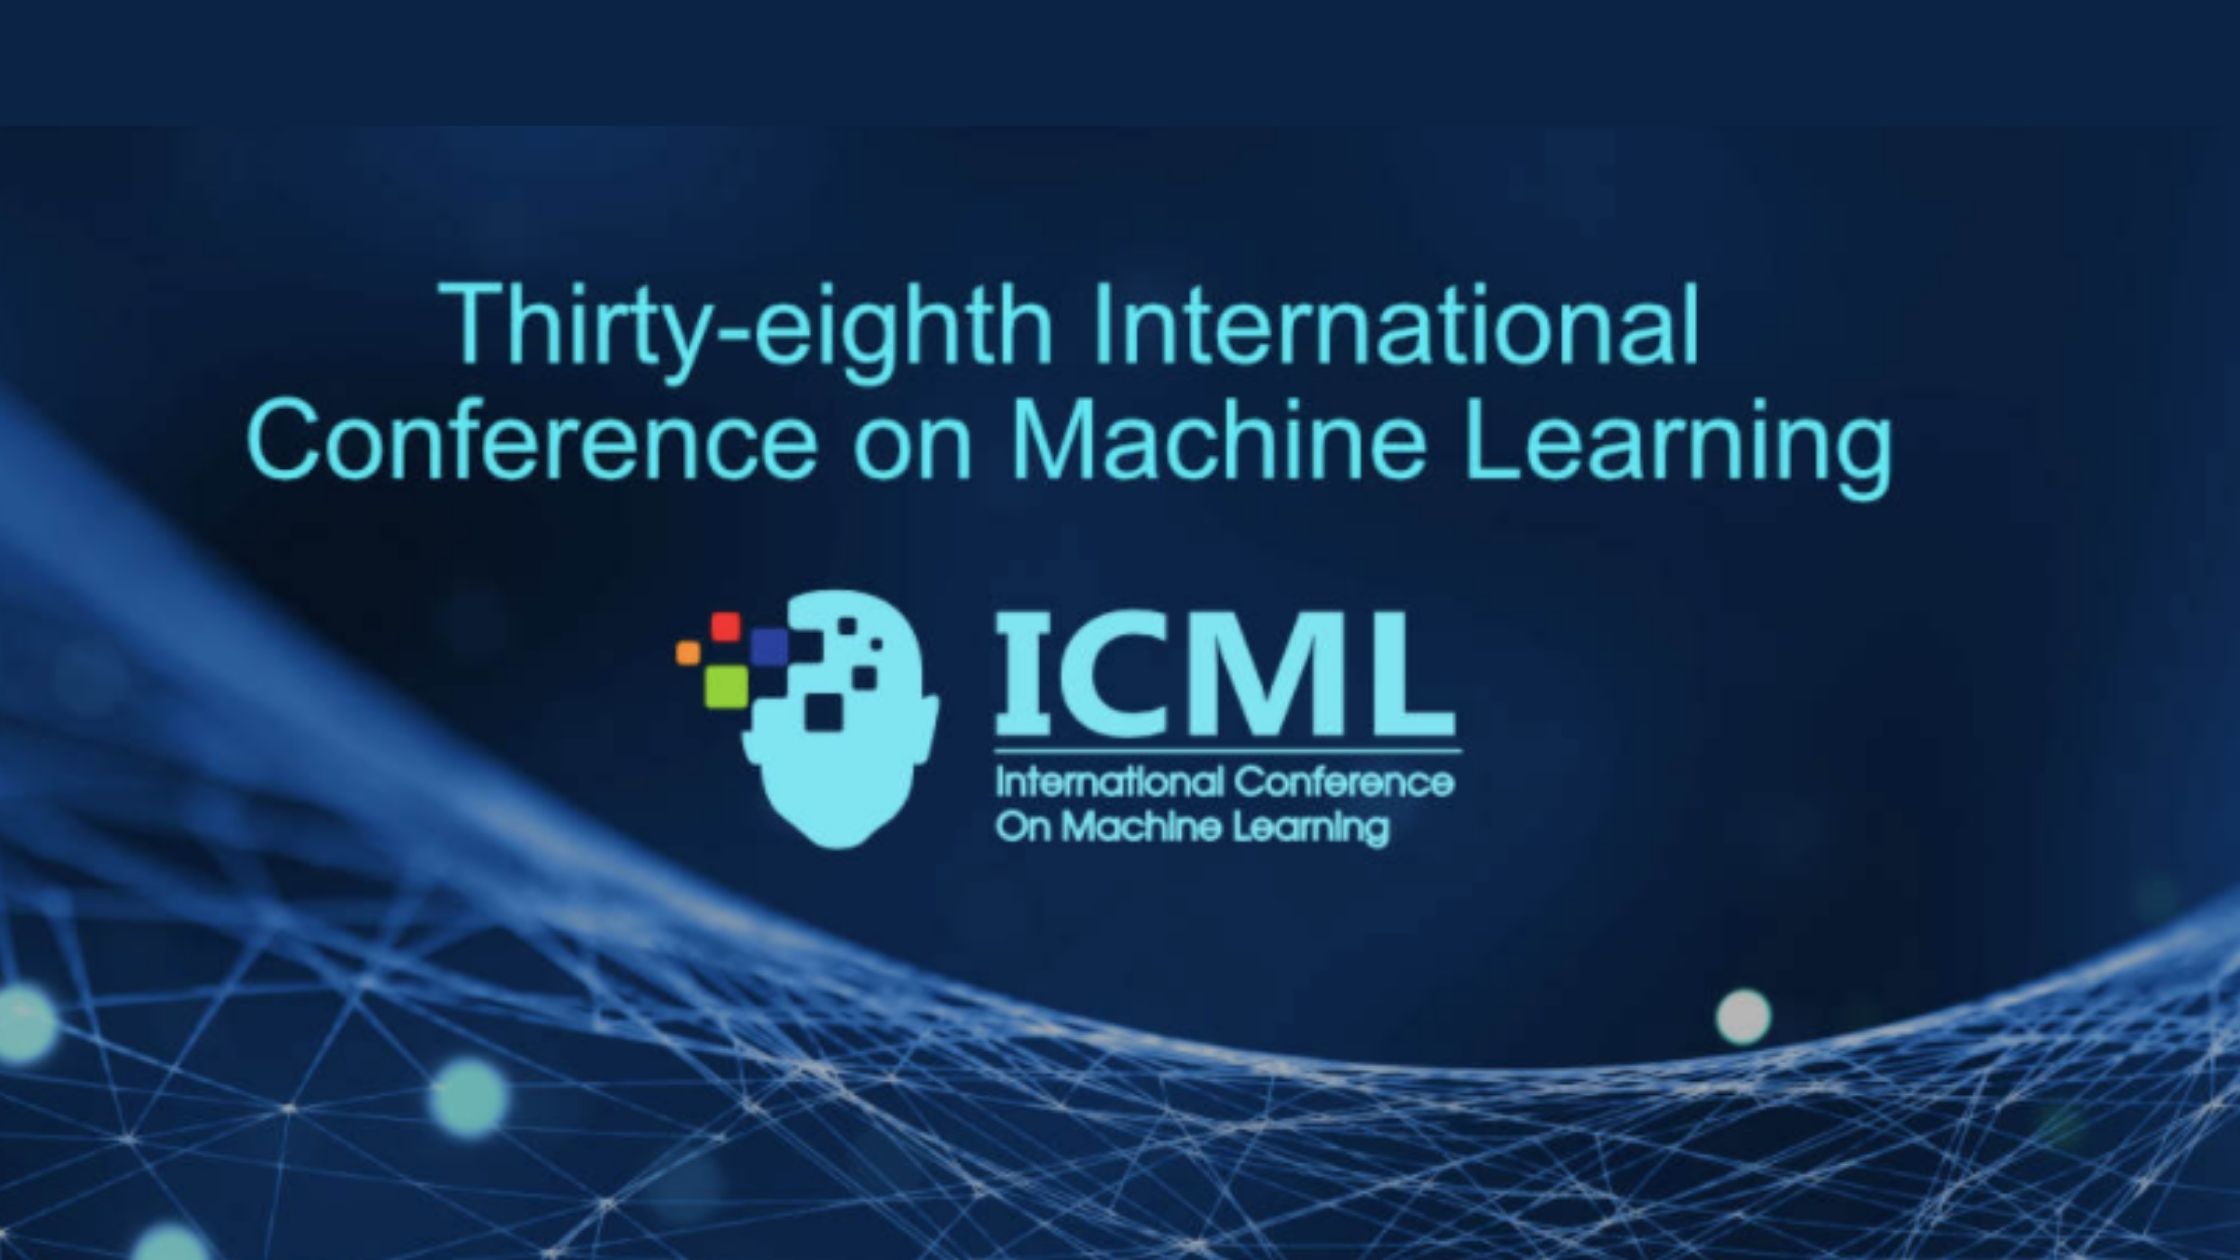 5 Best Machine Learning Research Papers At ICML 2021